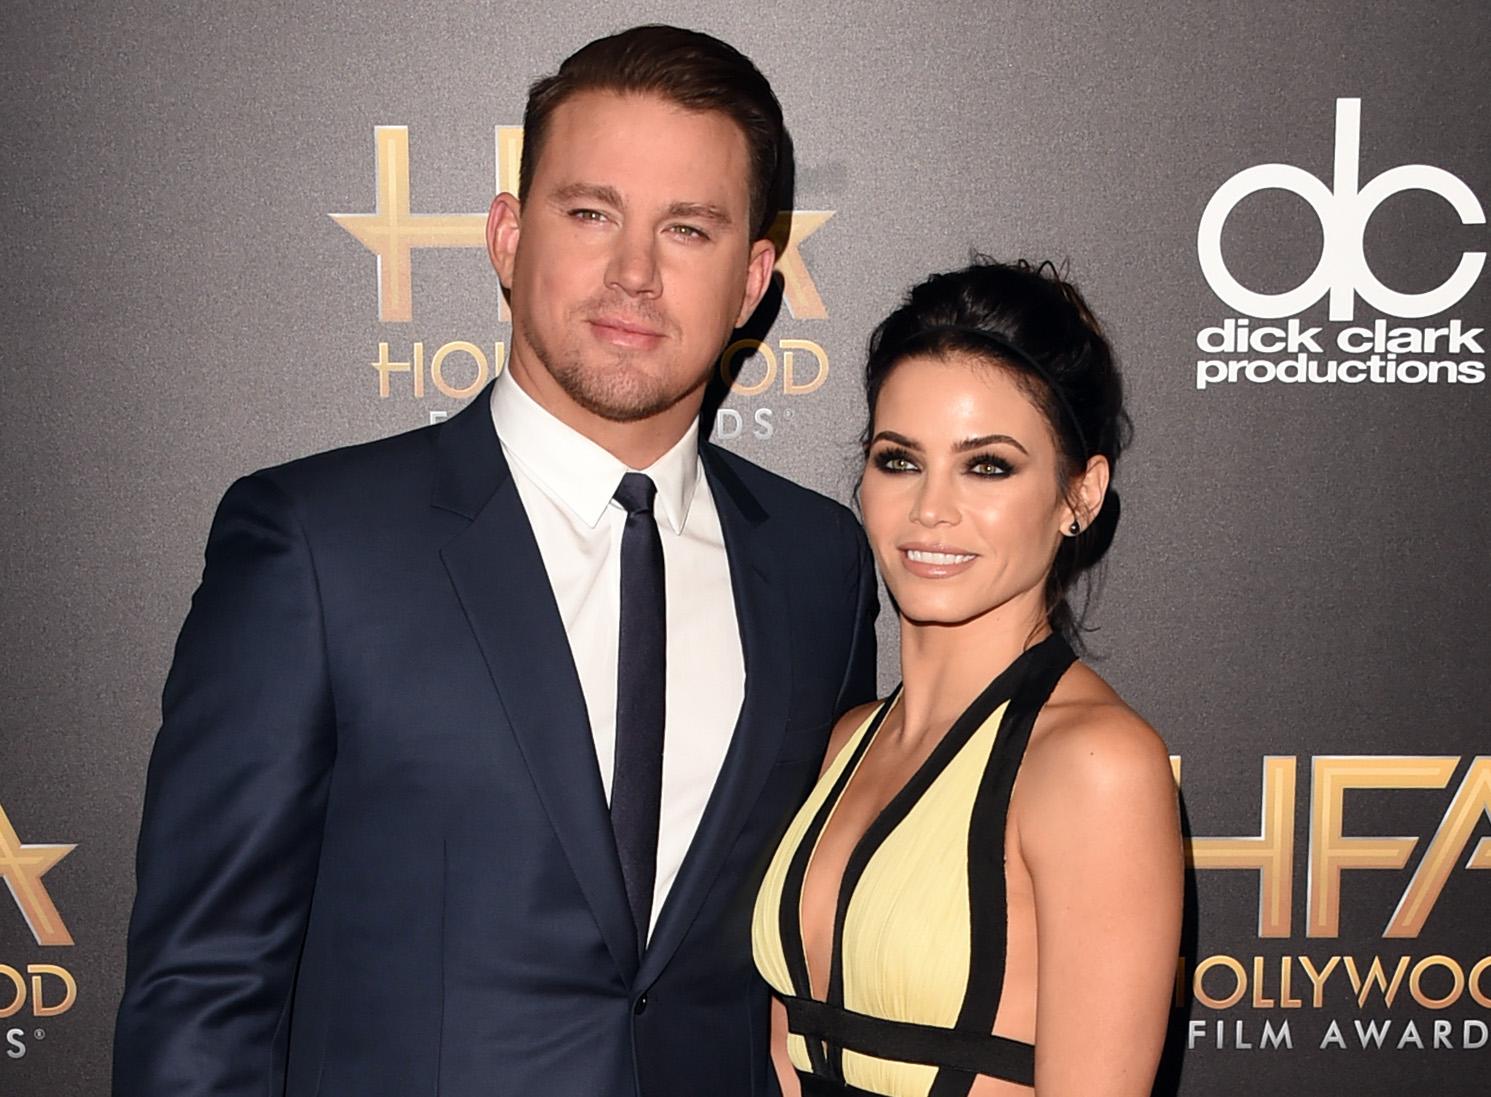 Actress Jenna Dewan Gets Engaged, Ex-Husband Channing Tatum Reportedly ‘Very Happy’